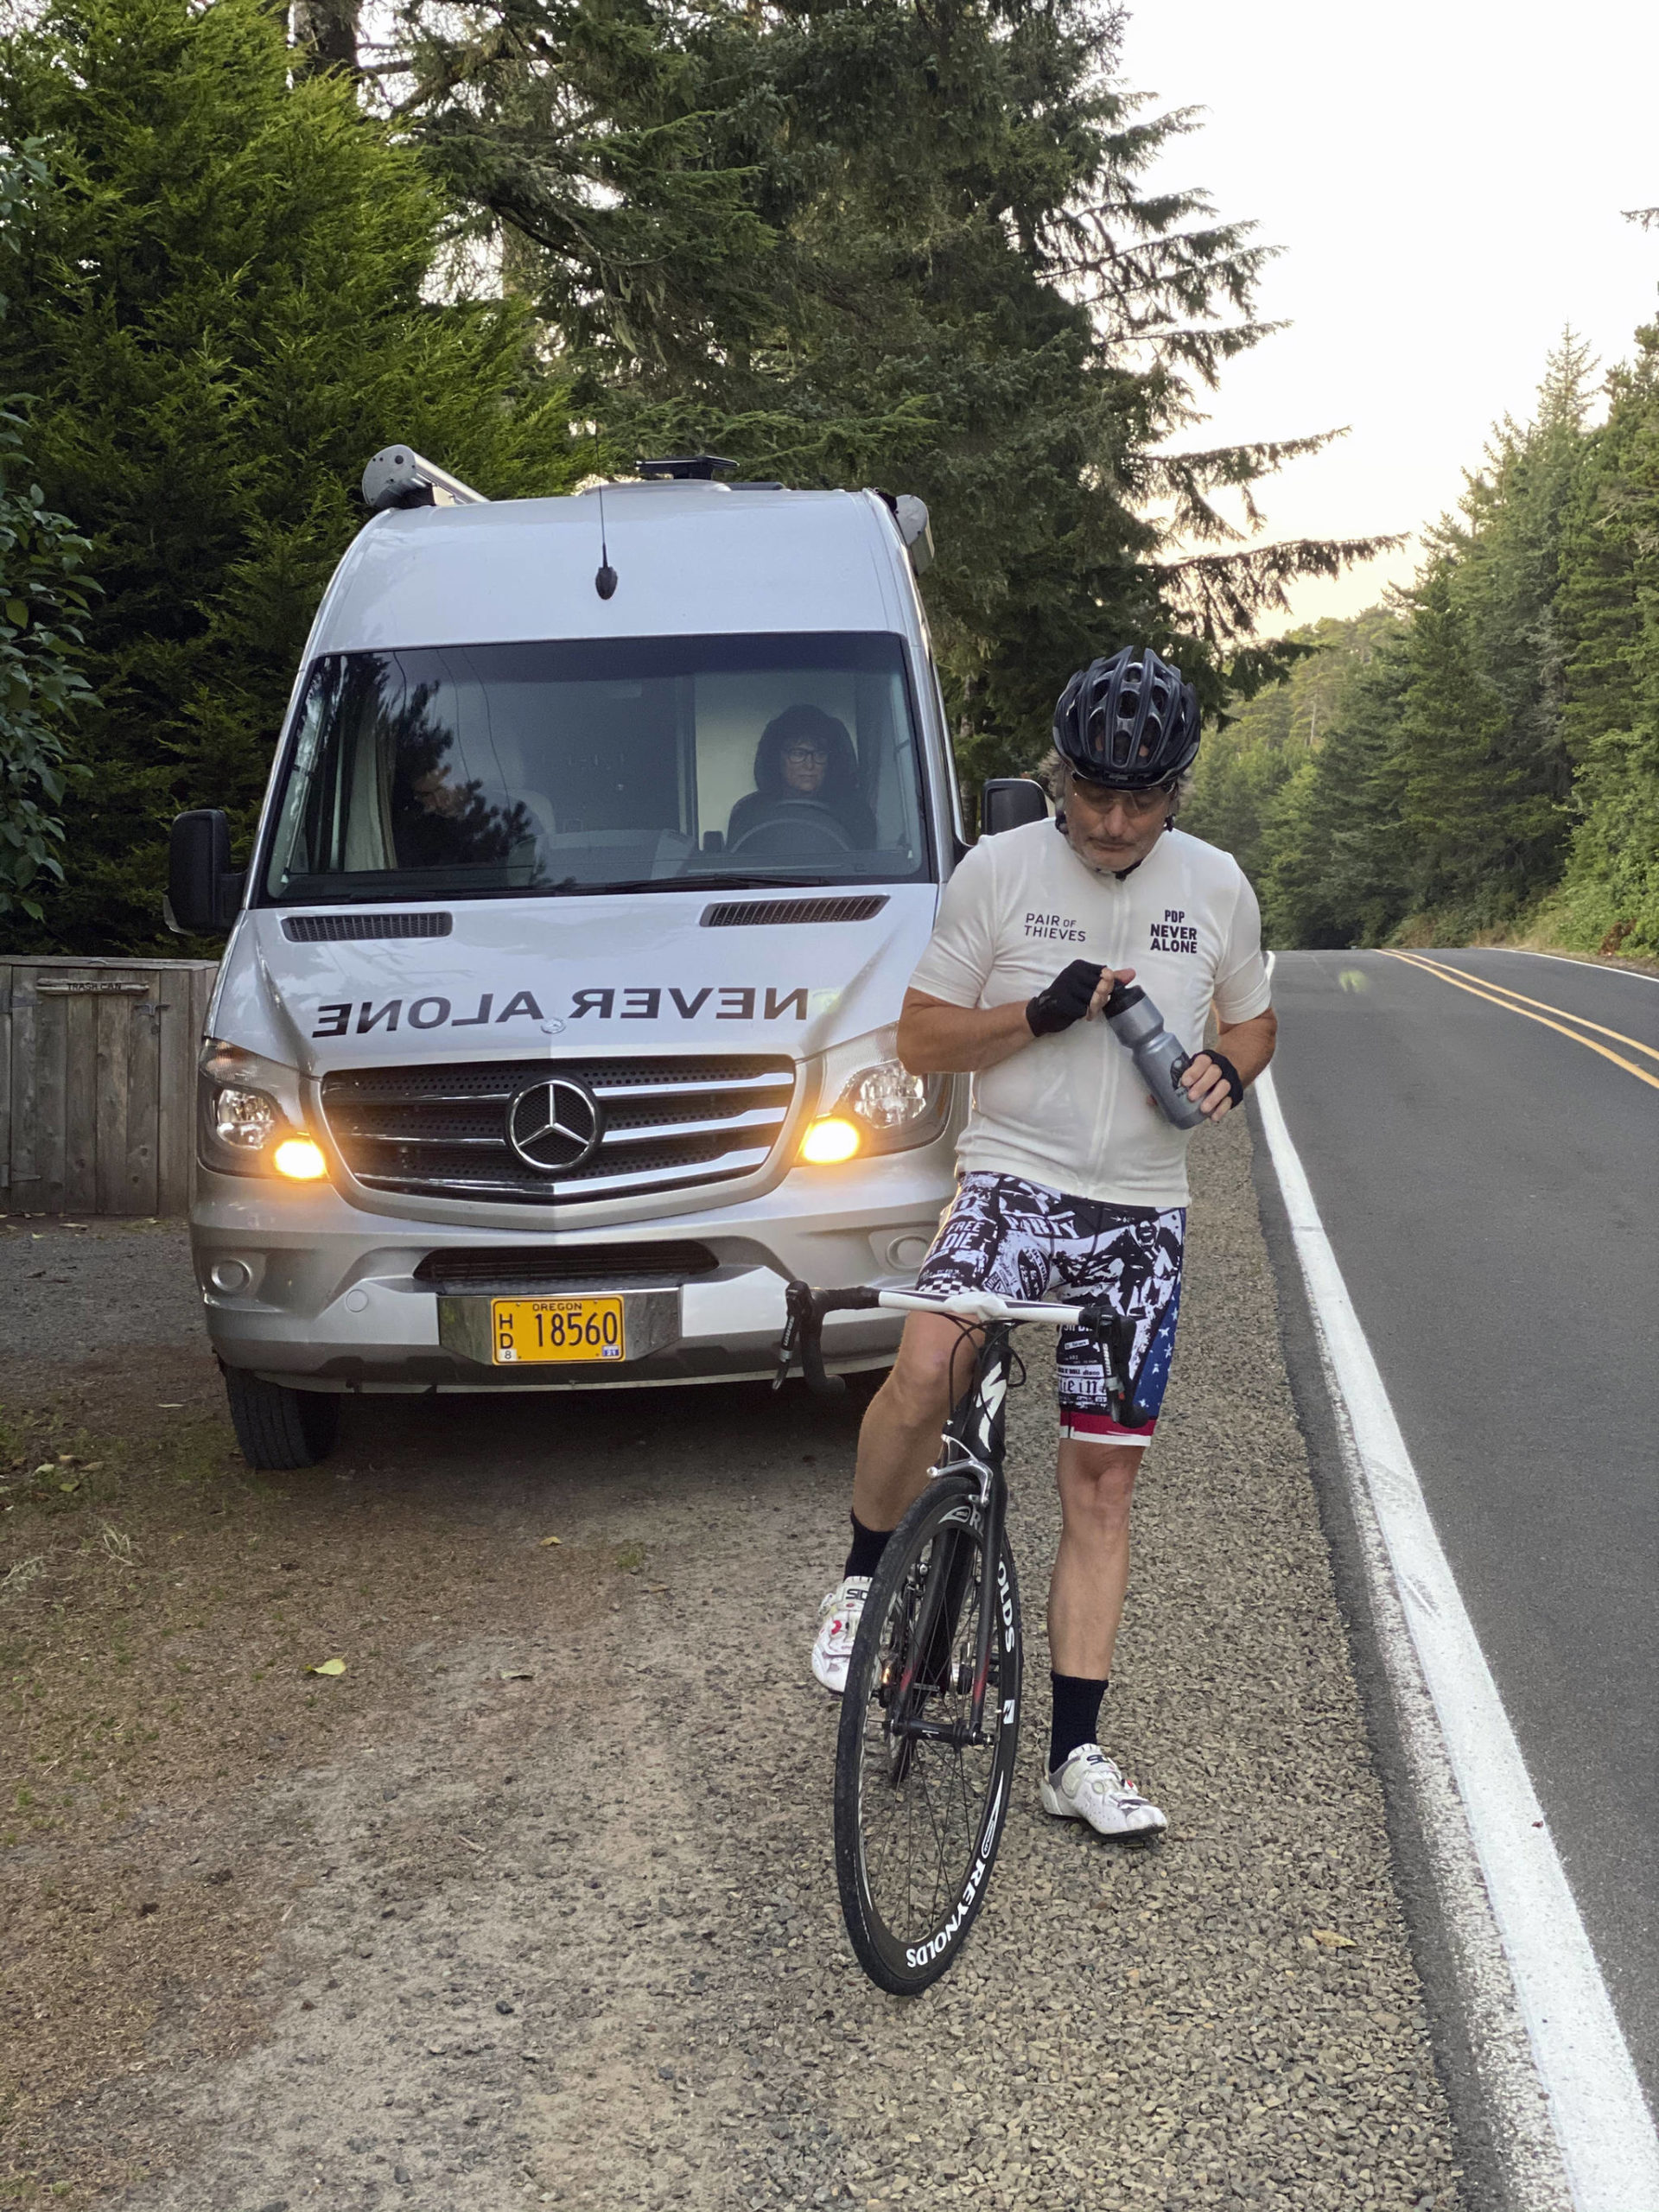 Alan Stuart/Pair of Thieves                                 This photo shows Doug Peterson stopped alongside the road with his wife, Lori, driving the support van as he cycles from the Canadian border to the Mexican border, last week in Pacific City, Ore. It was January 2015 that 17-year-old Page Peterson, the carefree Oregon boy who pitched on the baseball field and tore down the slopes on his snowboard, died by suicide. He was among more than 2,000 teenagers his age that would commit suicide in that year alone, a number that is both staggering and heartbreaking. Now, his father Doug Peterson is riding his bike from the Canadian border to the Mexican border during the month of September, raising money with the support of apparel company Pair of Thieves and awareness for National Suicide Prevention Month.